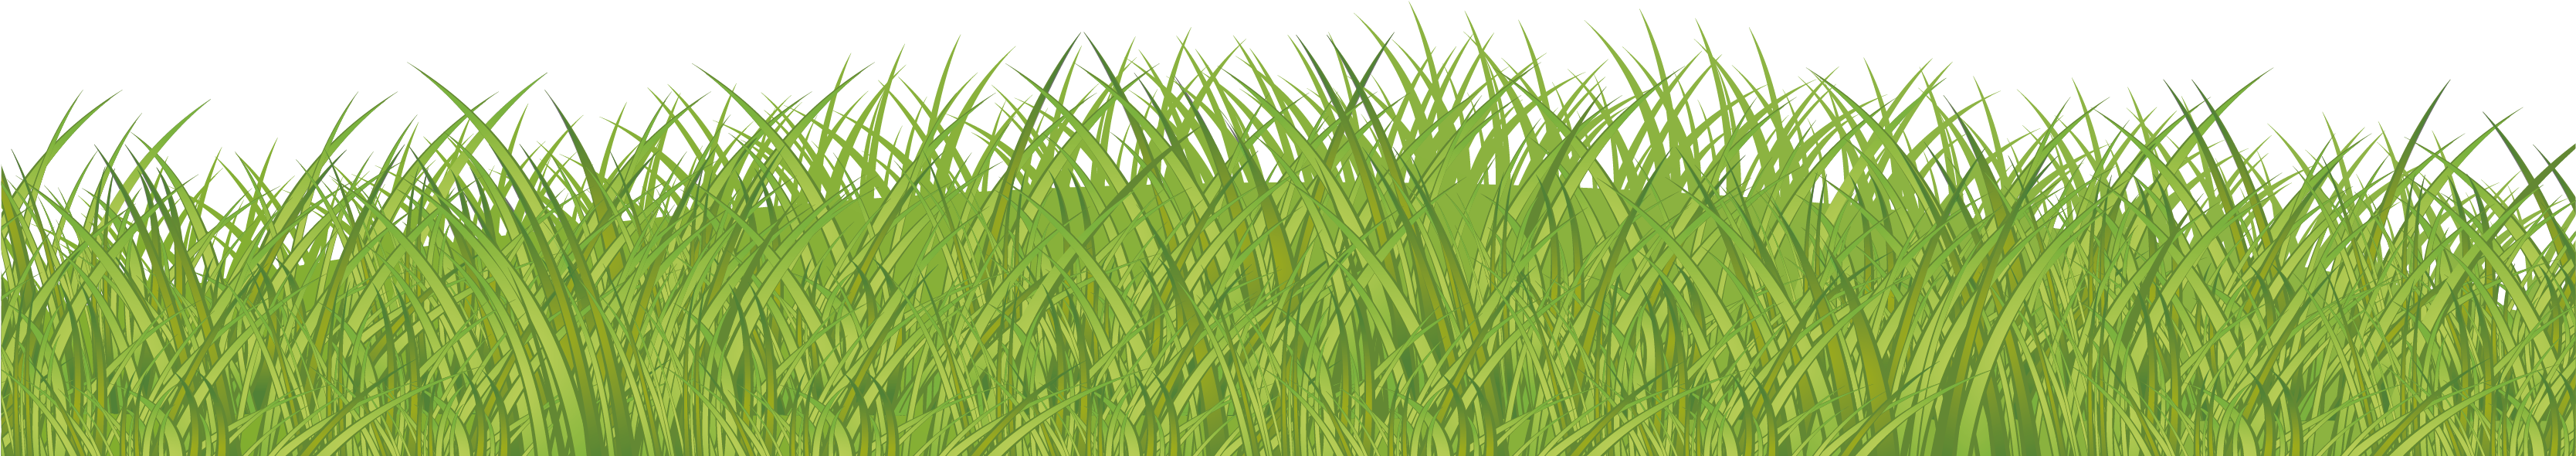 Lawn Green Grasses Family - Herbaceous Plant (3421x1500)